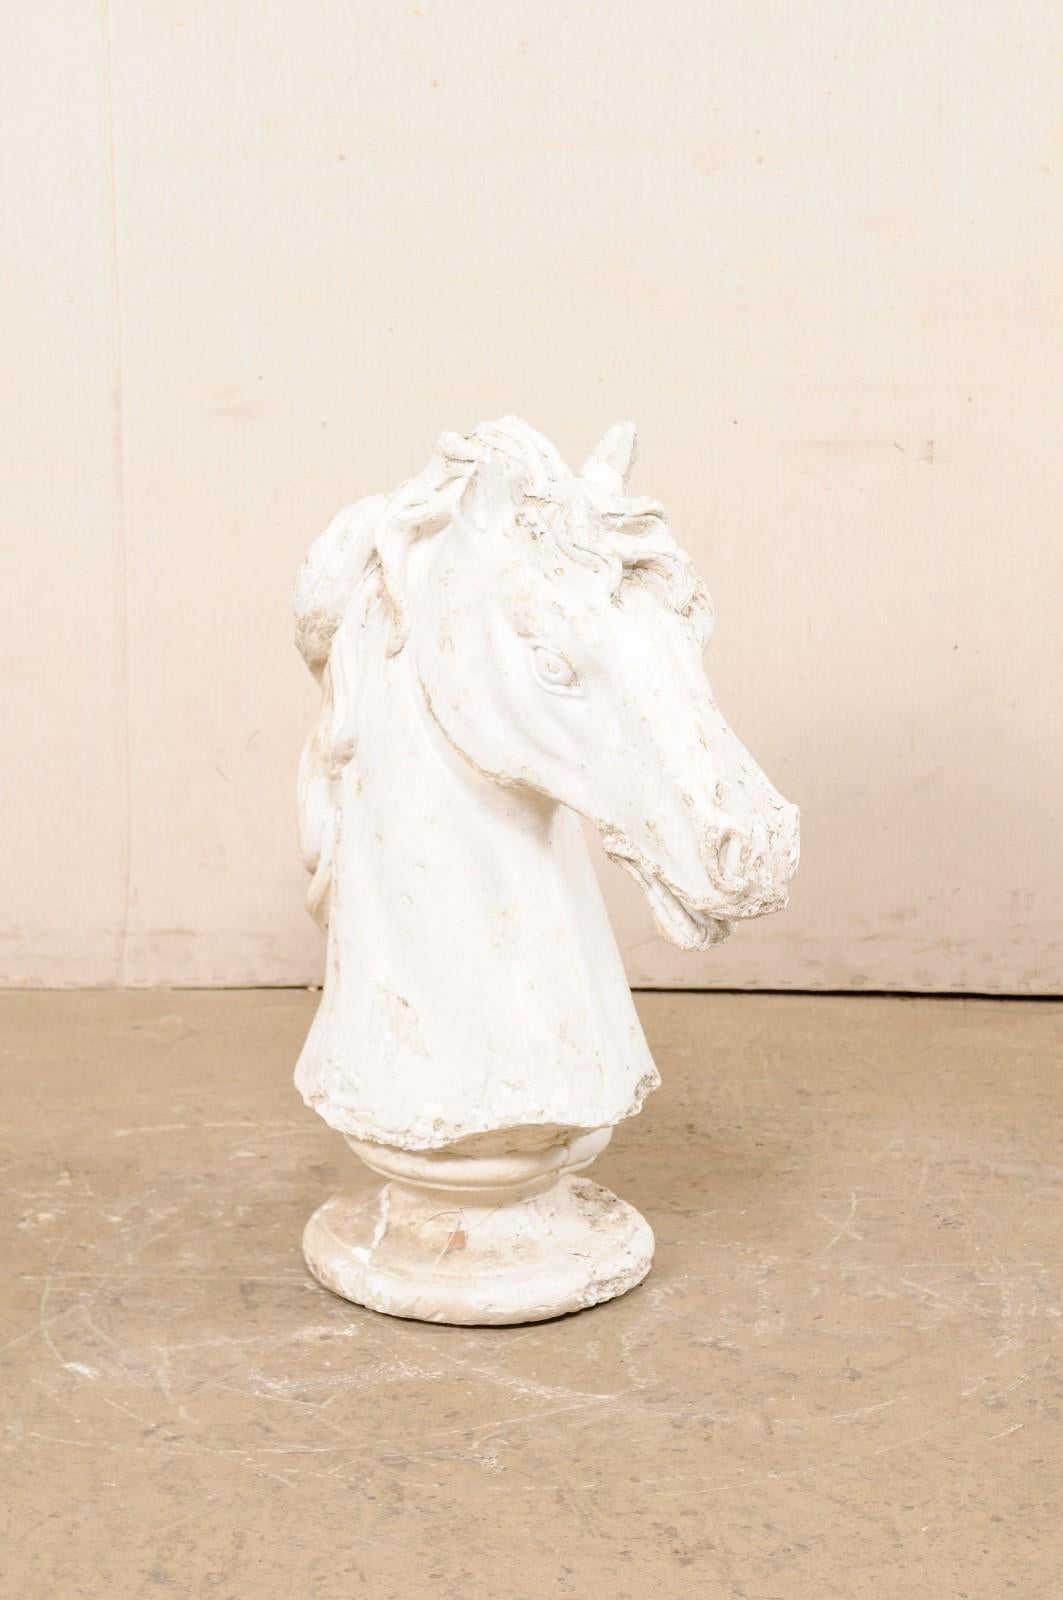 A European plaster sculptural horse head bust, from the 20th century. This fabulous plaster art piece from Europe, standing just shy of 3 feet in height, features a three-dimensional horse head with a round pedestal base. The forward-facing horse